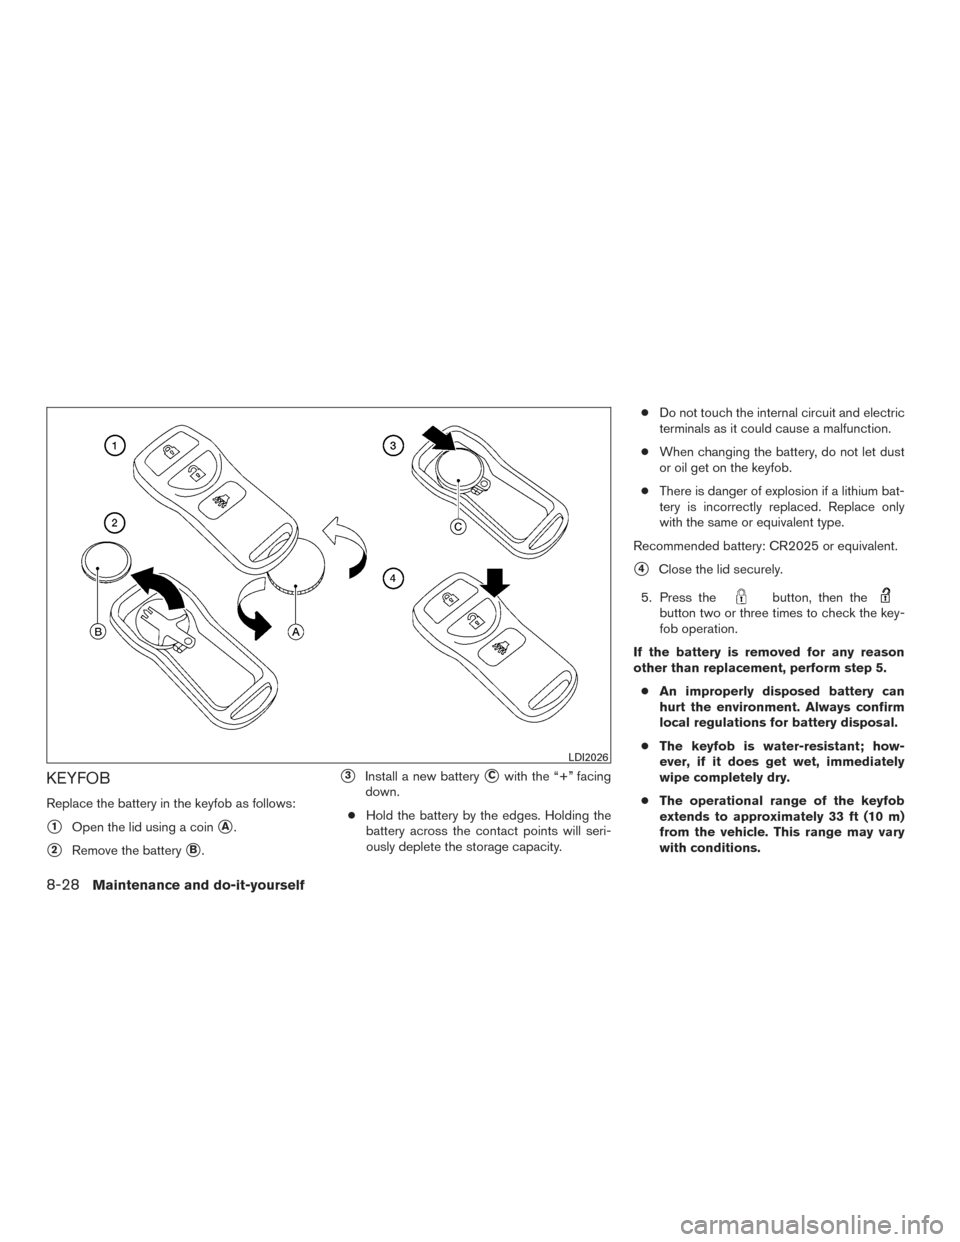 NISSAN XTERRA 2015 N50 / 2.G Owners Manual KEYFOB
Replace the battery in the keyfob as follows:
1Open the lid using a coinA.
2Remove the batteryB.
3Install a new batteryCwith the “+” facing
down.
● Hold the battery by the edges. Ho